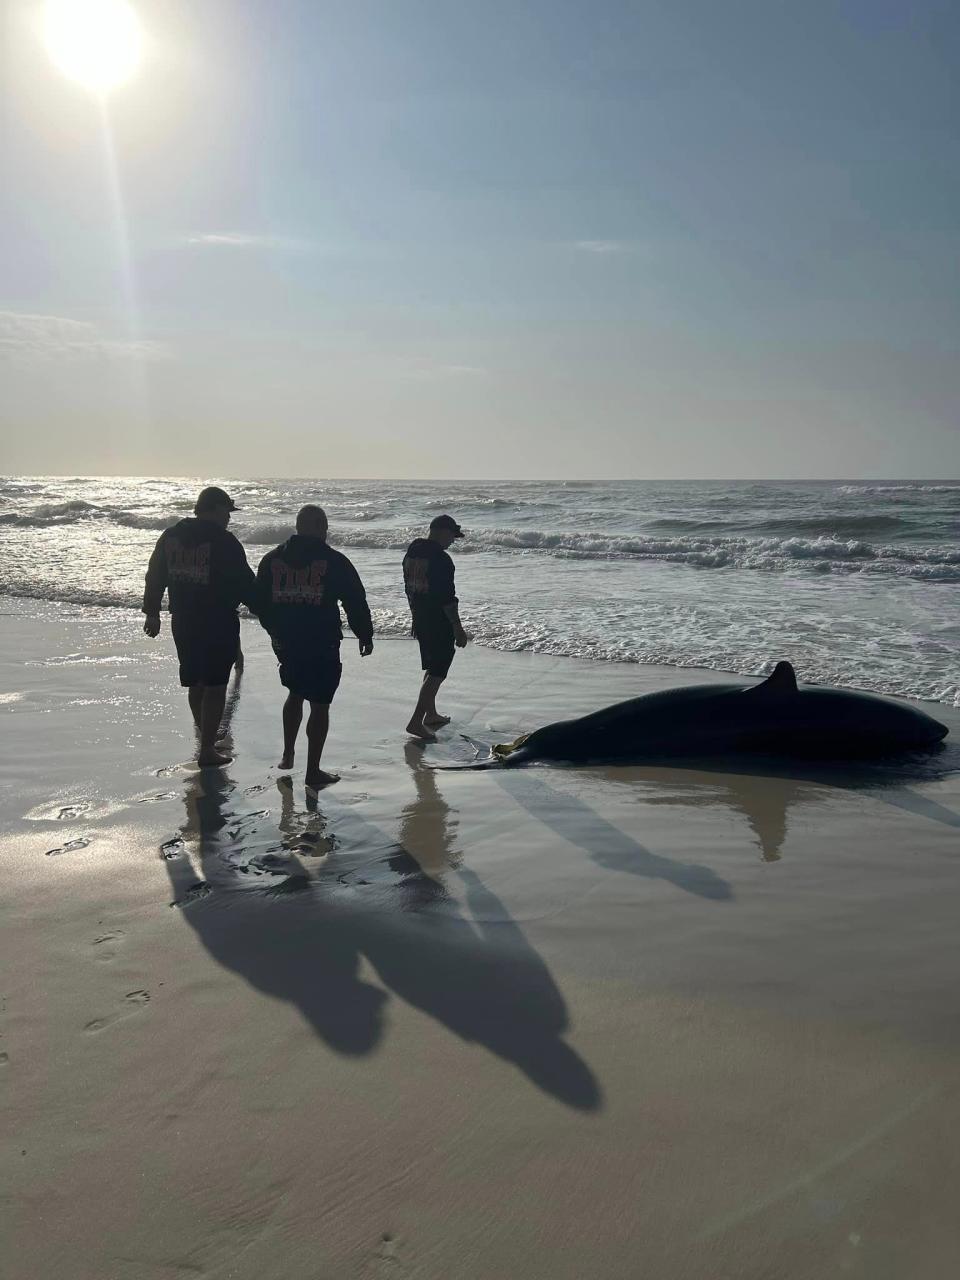 A deceased, pregnant great white shark, estimated to be between 13 and 15 feet long, washed ashore Navarre Beach Friday morning.